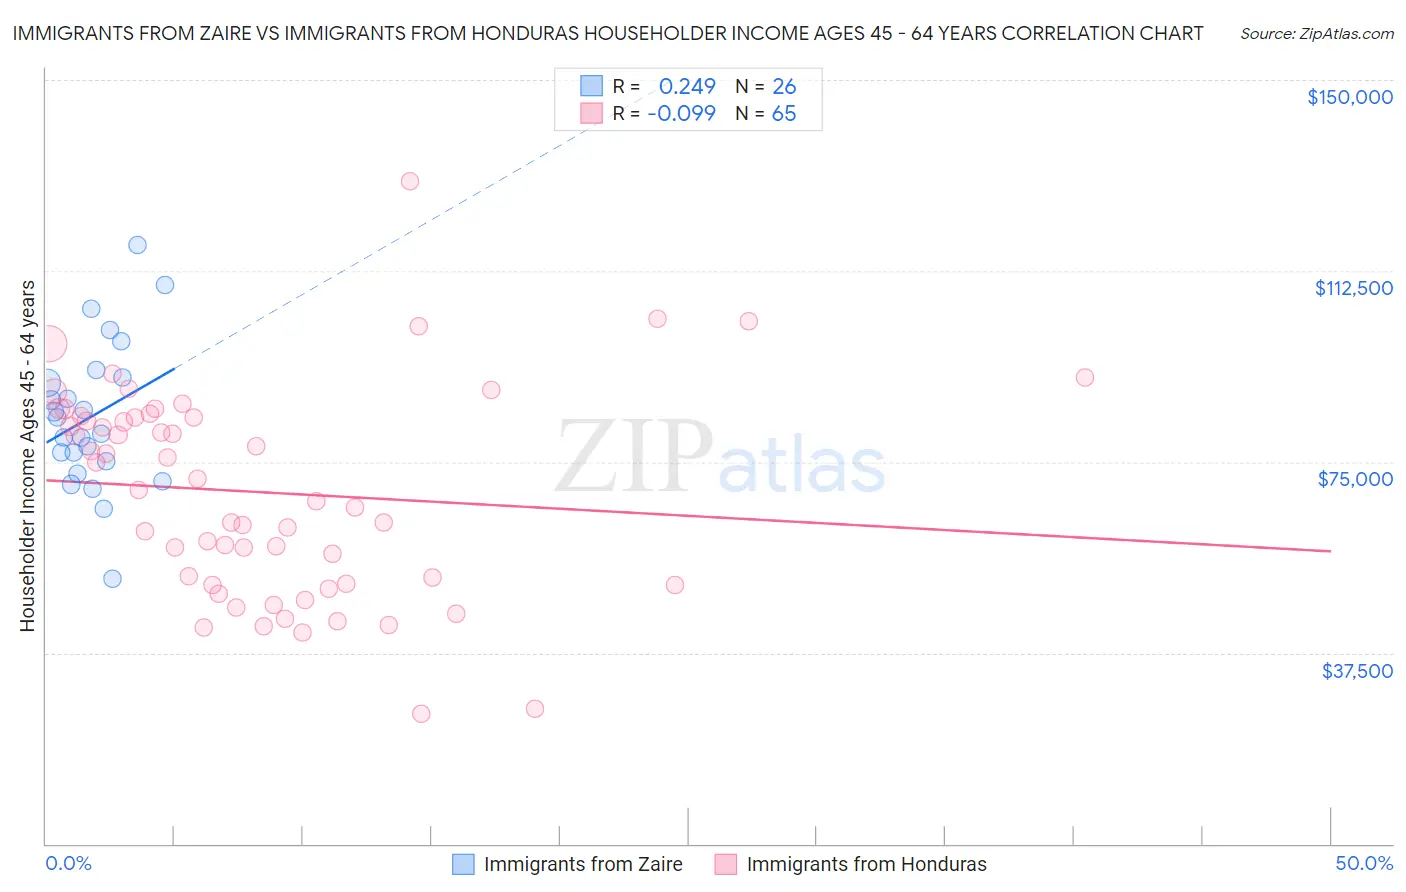 Immigrants from Zaire vs Immigrants from Honduras Householder Income Ages 45 - 64 years